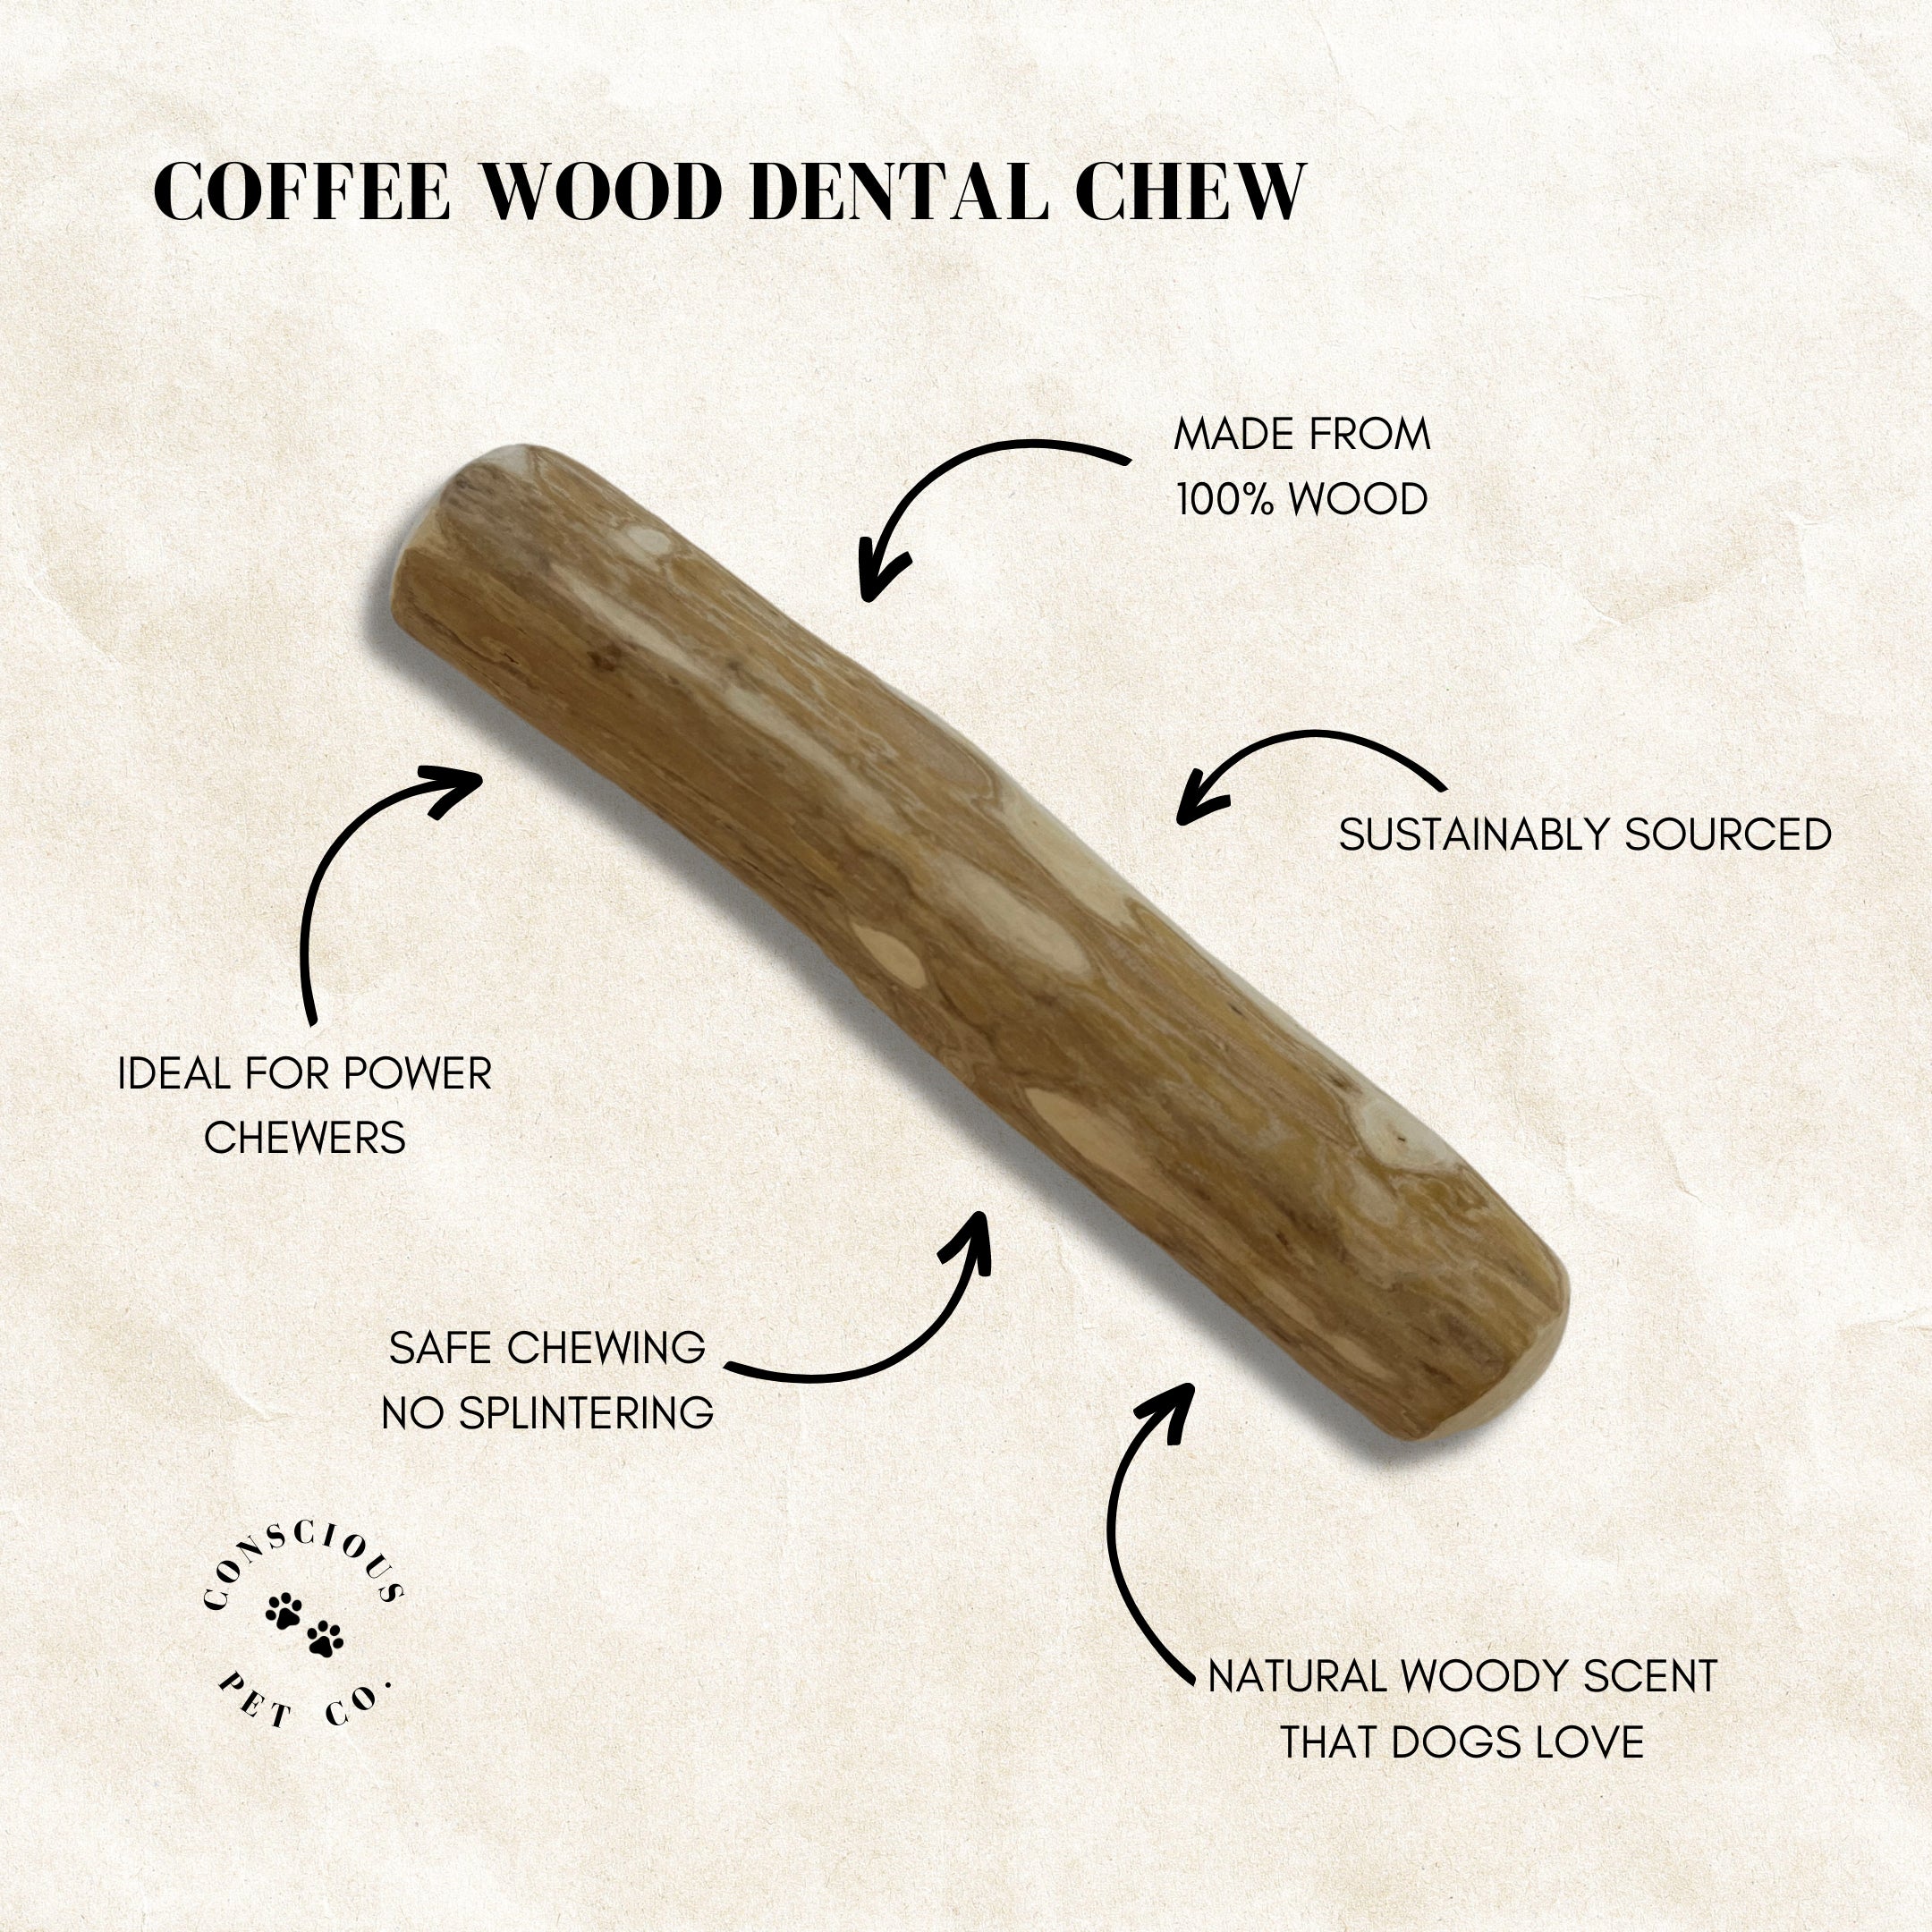 Sustainable Coffee Wood Chew Toys